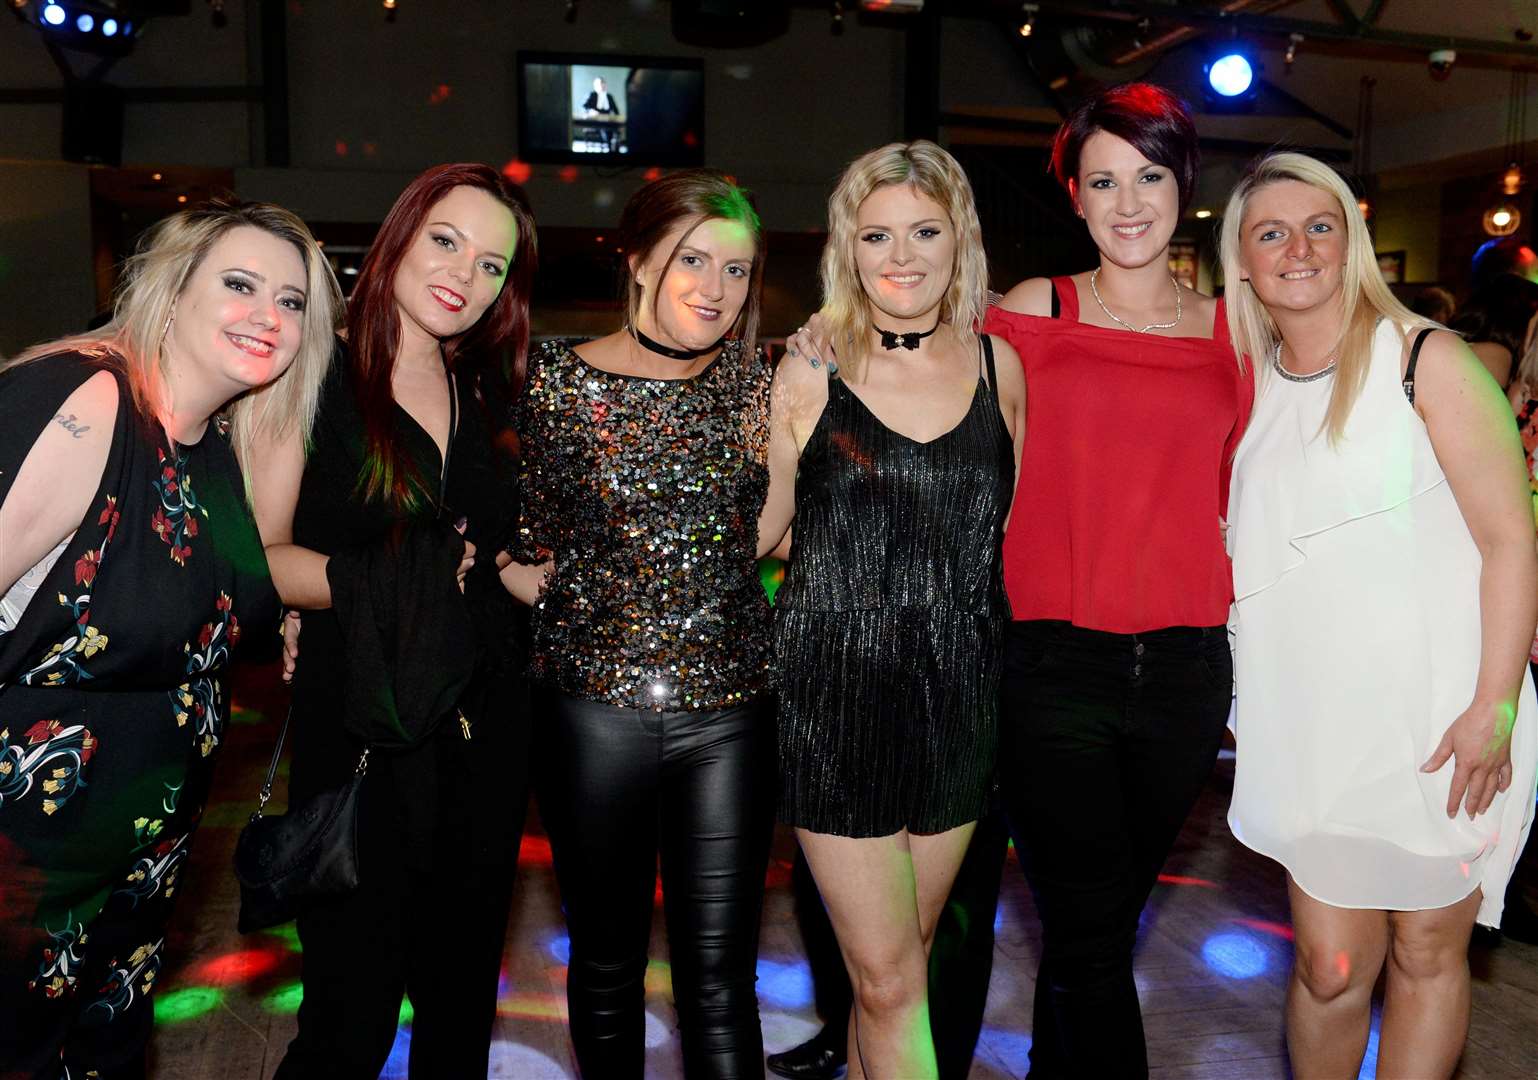 Jade Buchanan(3rd right) parties on her 28th birthday at Auctioneers.